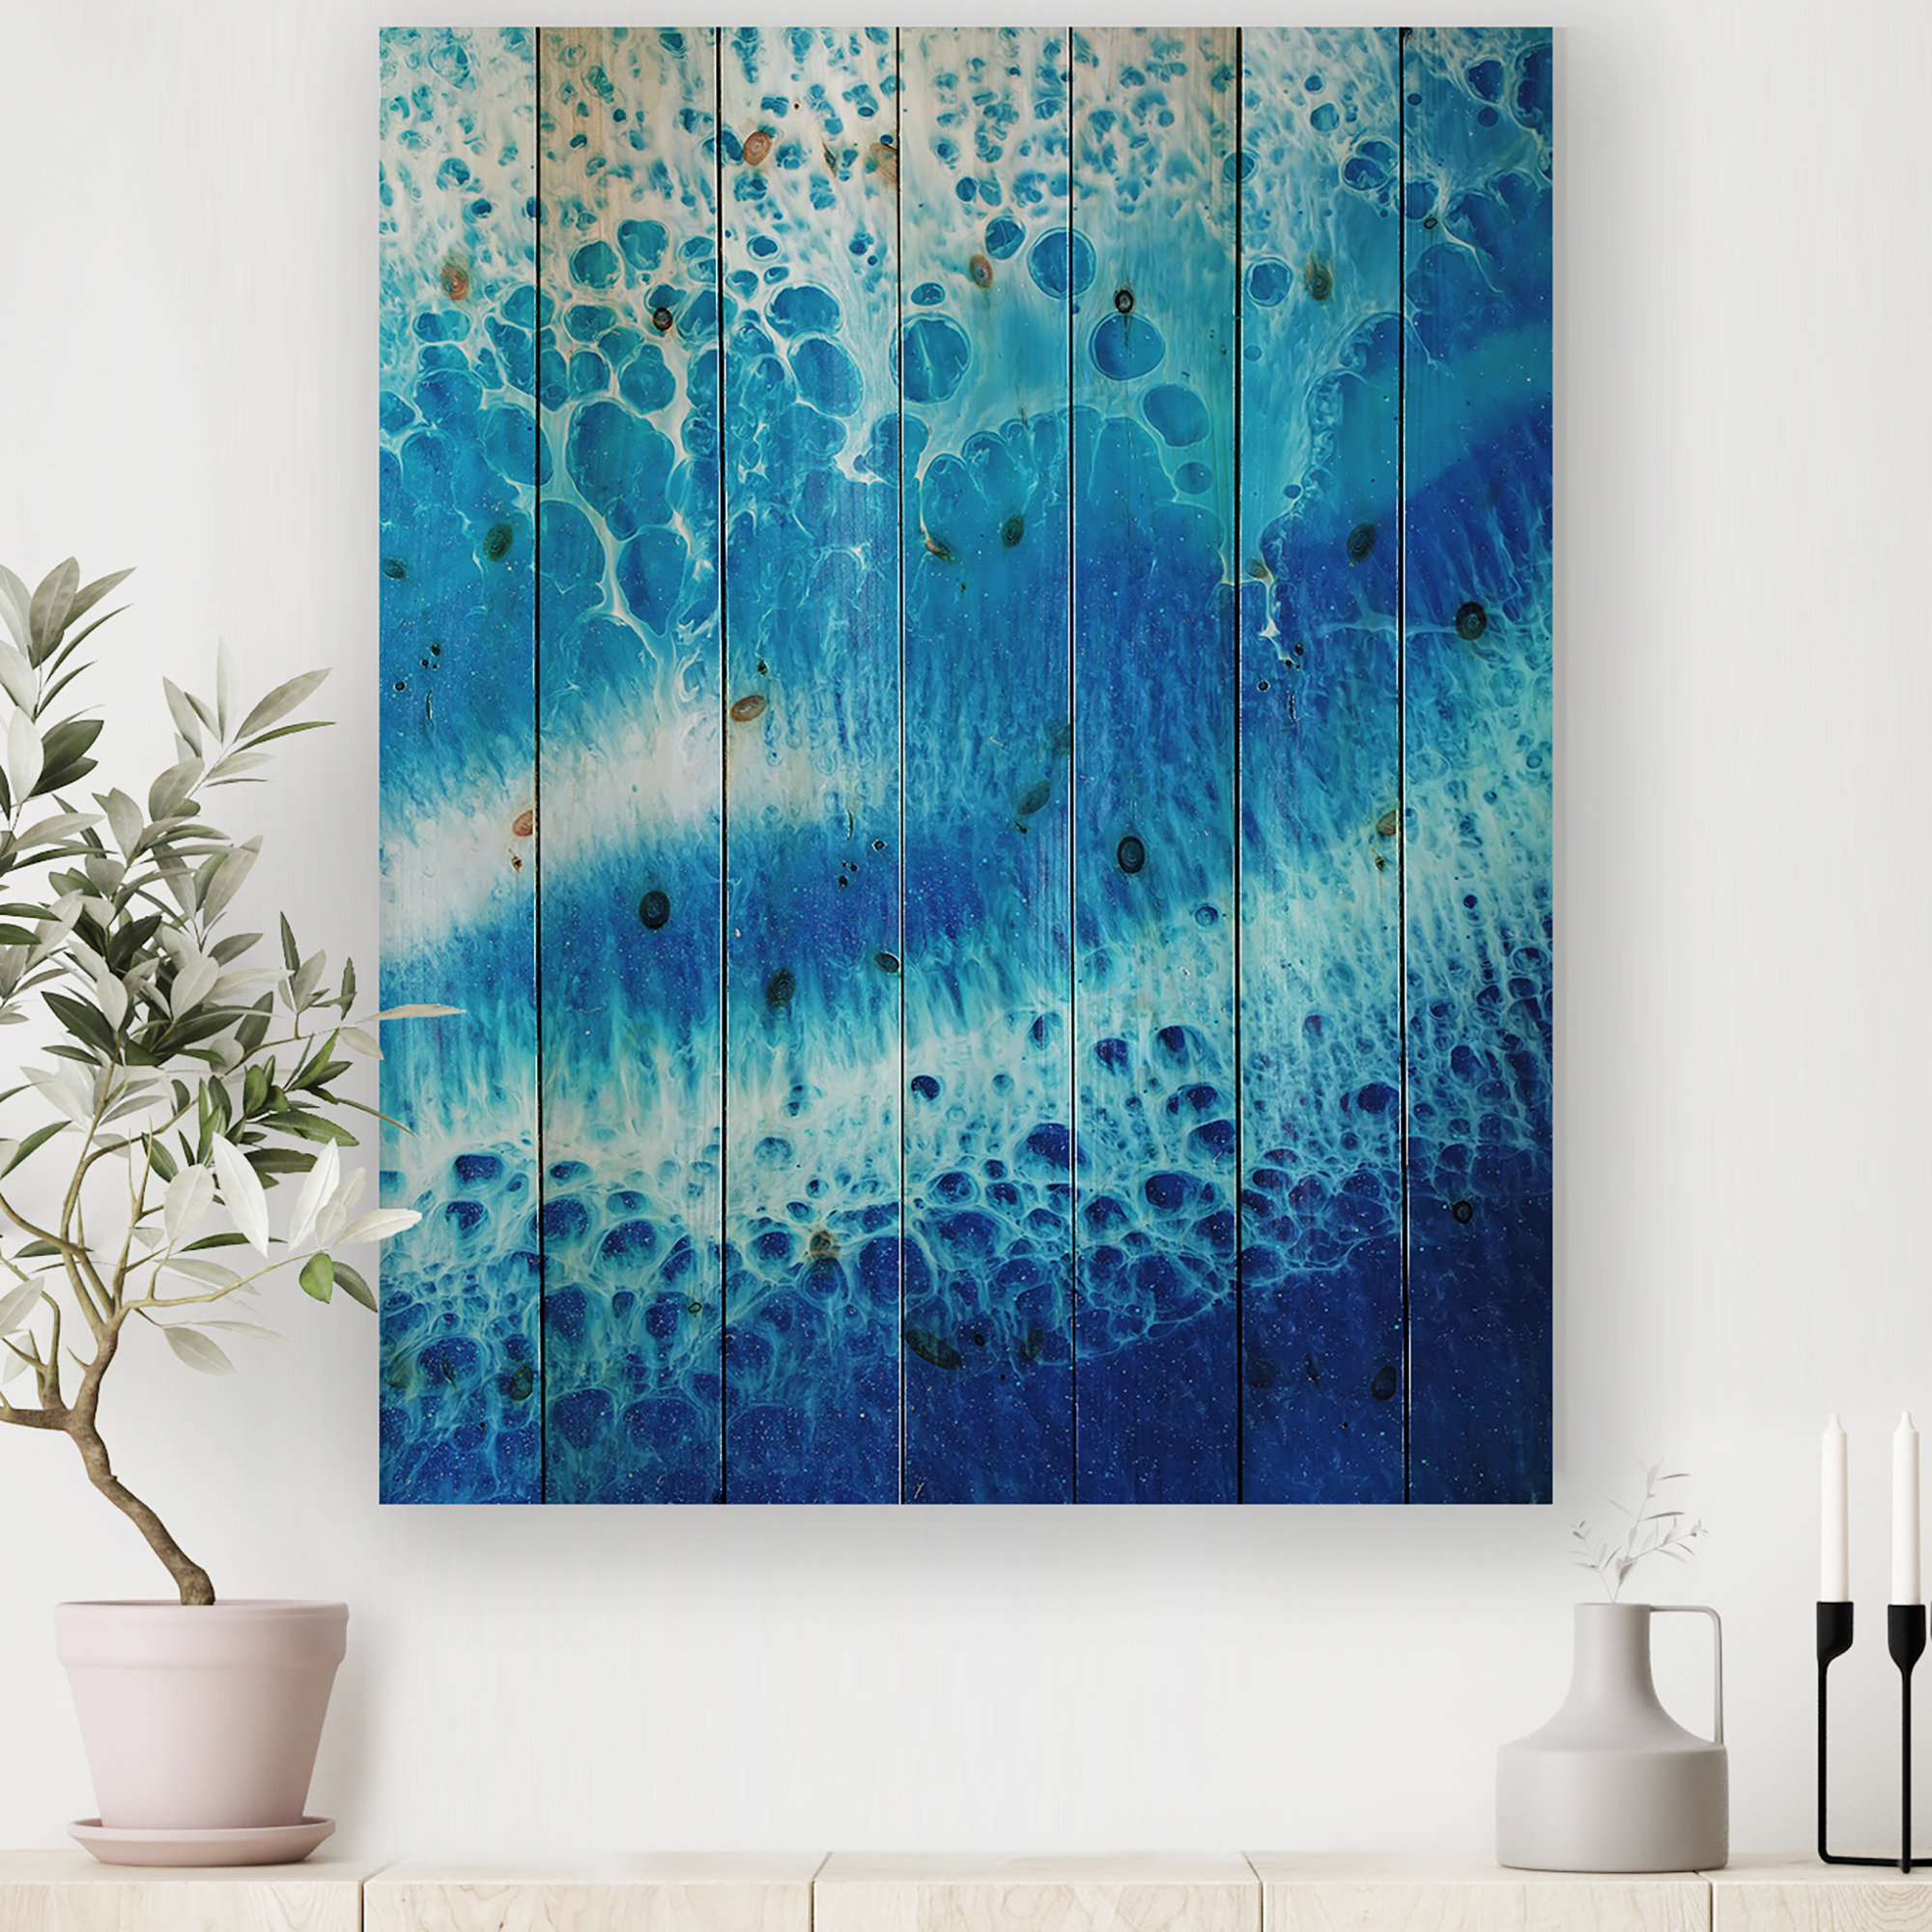 Epoxy Resin Abstract Original Painting on Canvas Environment, Art